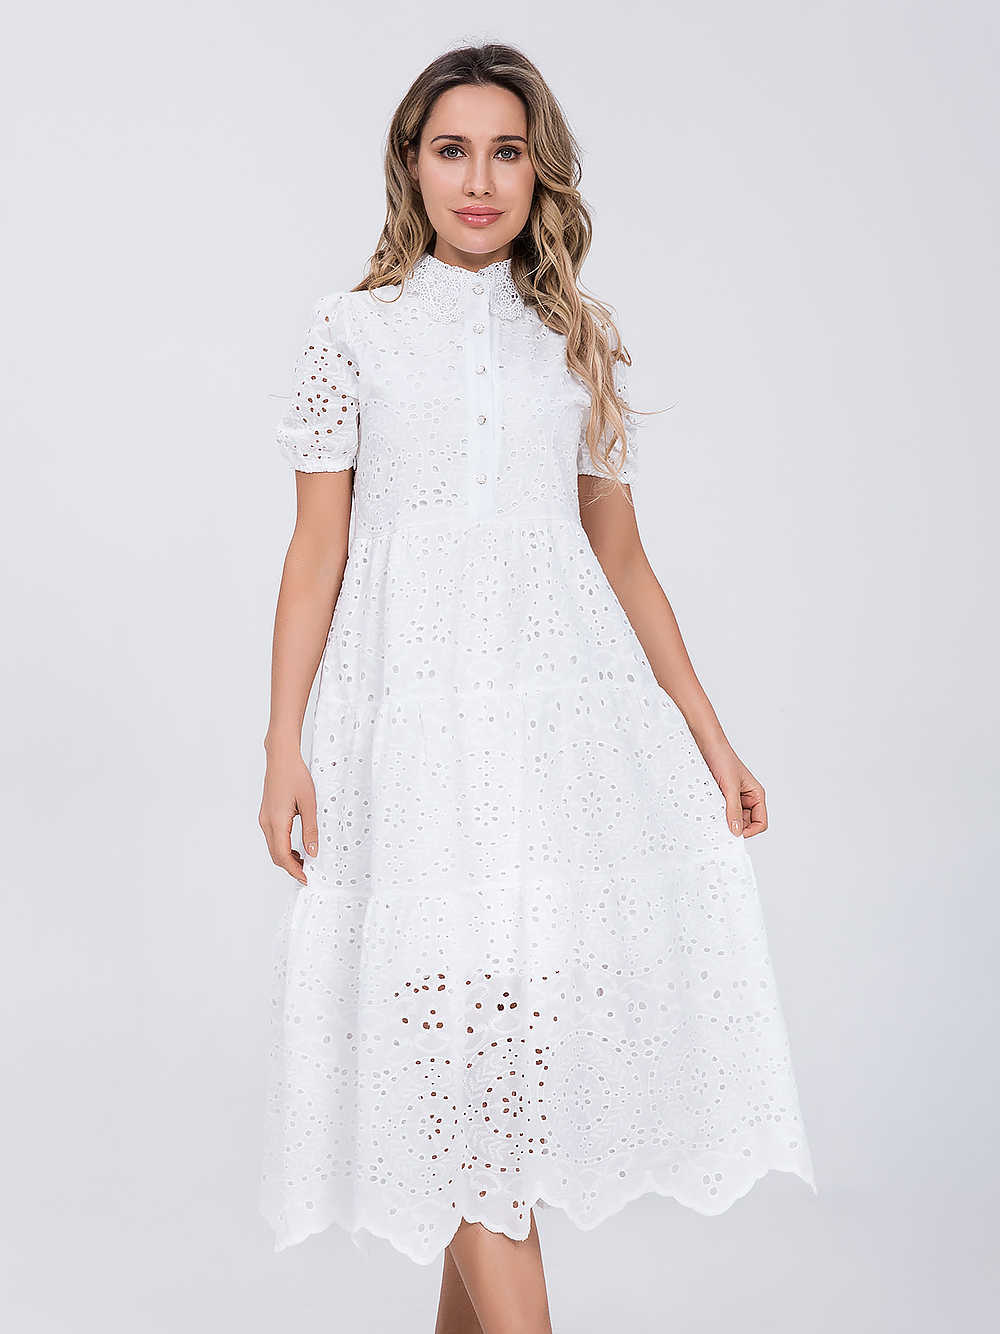 Casual Dresses Marwin Cotton Hollow Out Summer White Dress Women Holiday Perppy Casual High midje Ruffled Mini Dresses A-Line Frills Vestido W0315